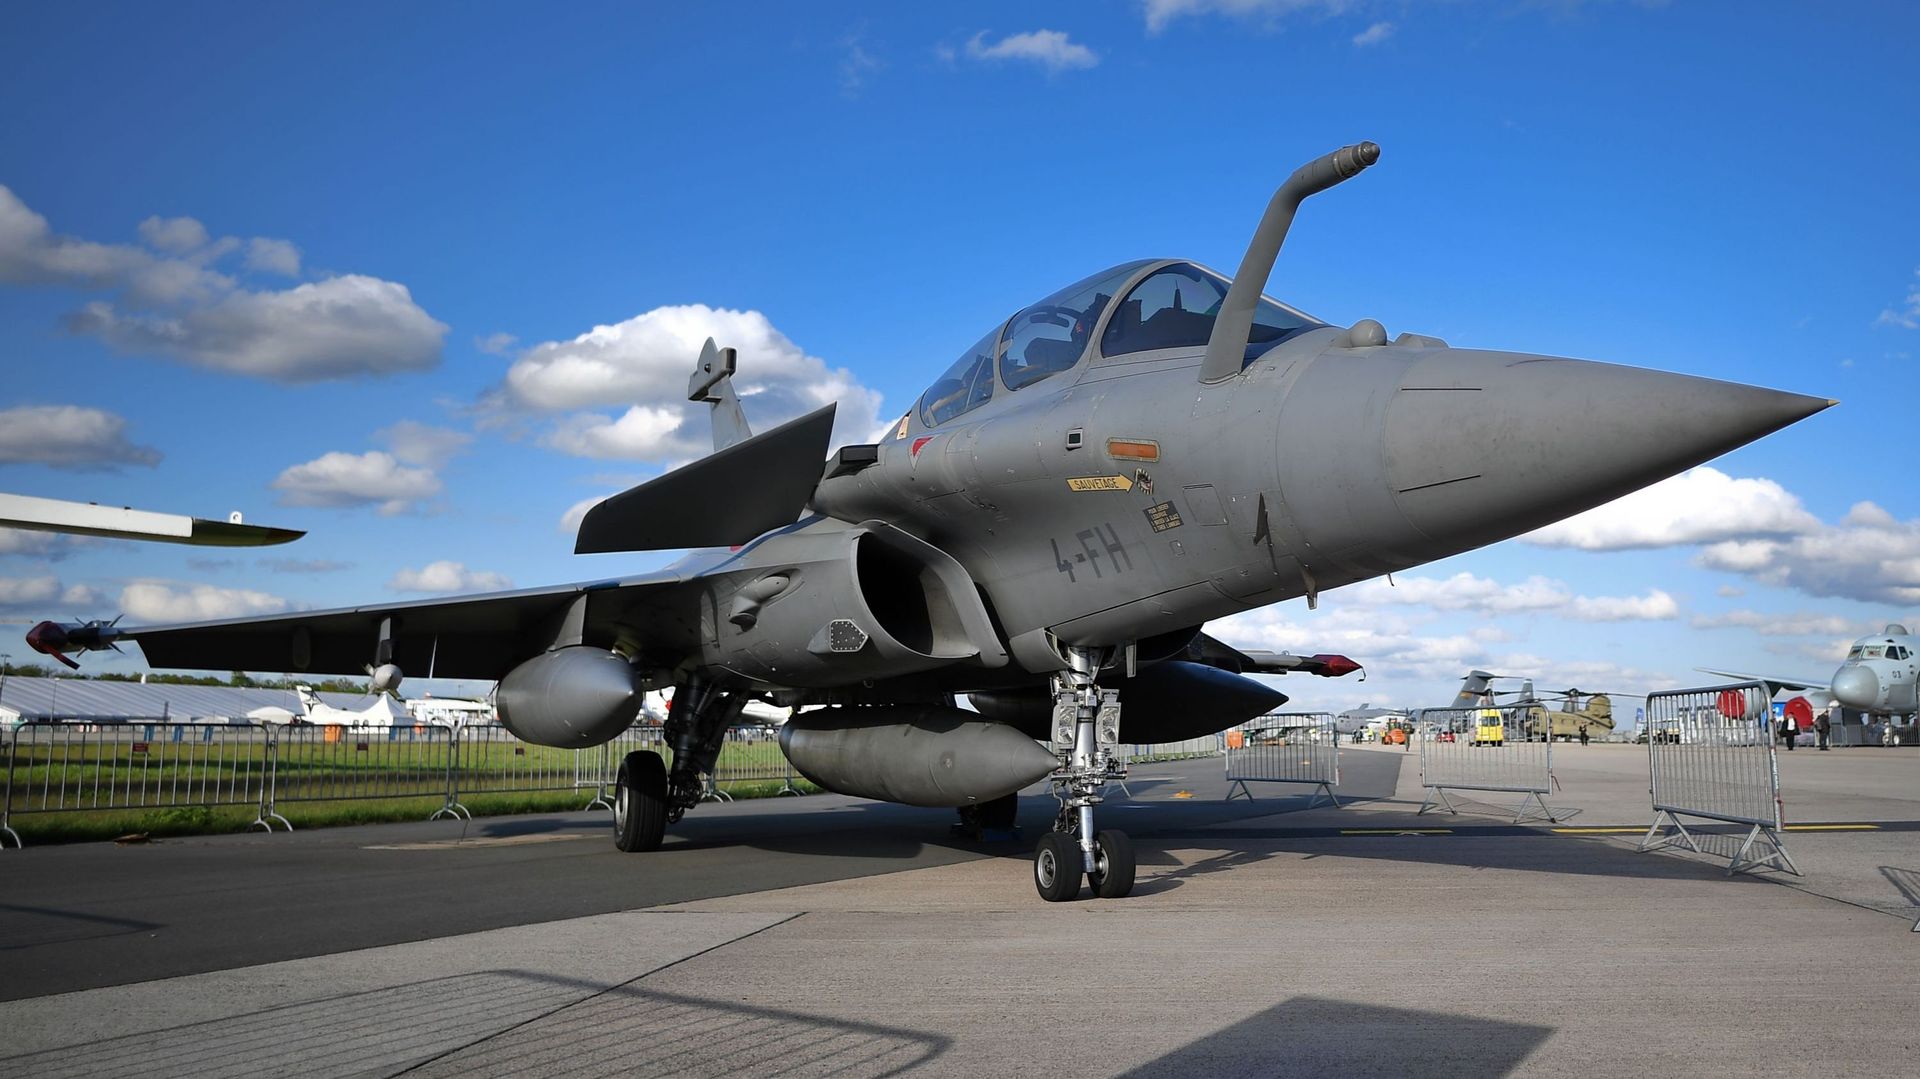 French-made Rafale jet fighter